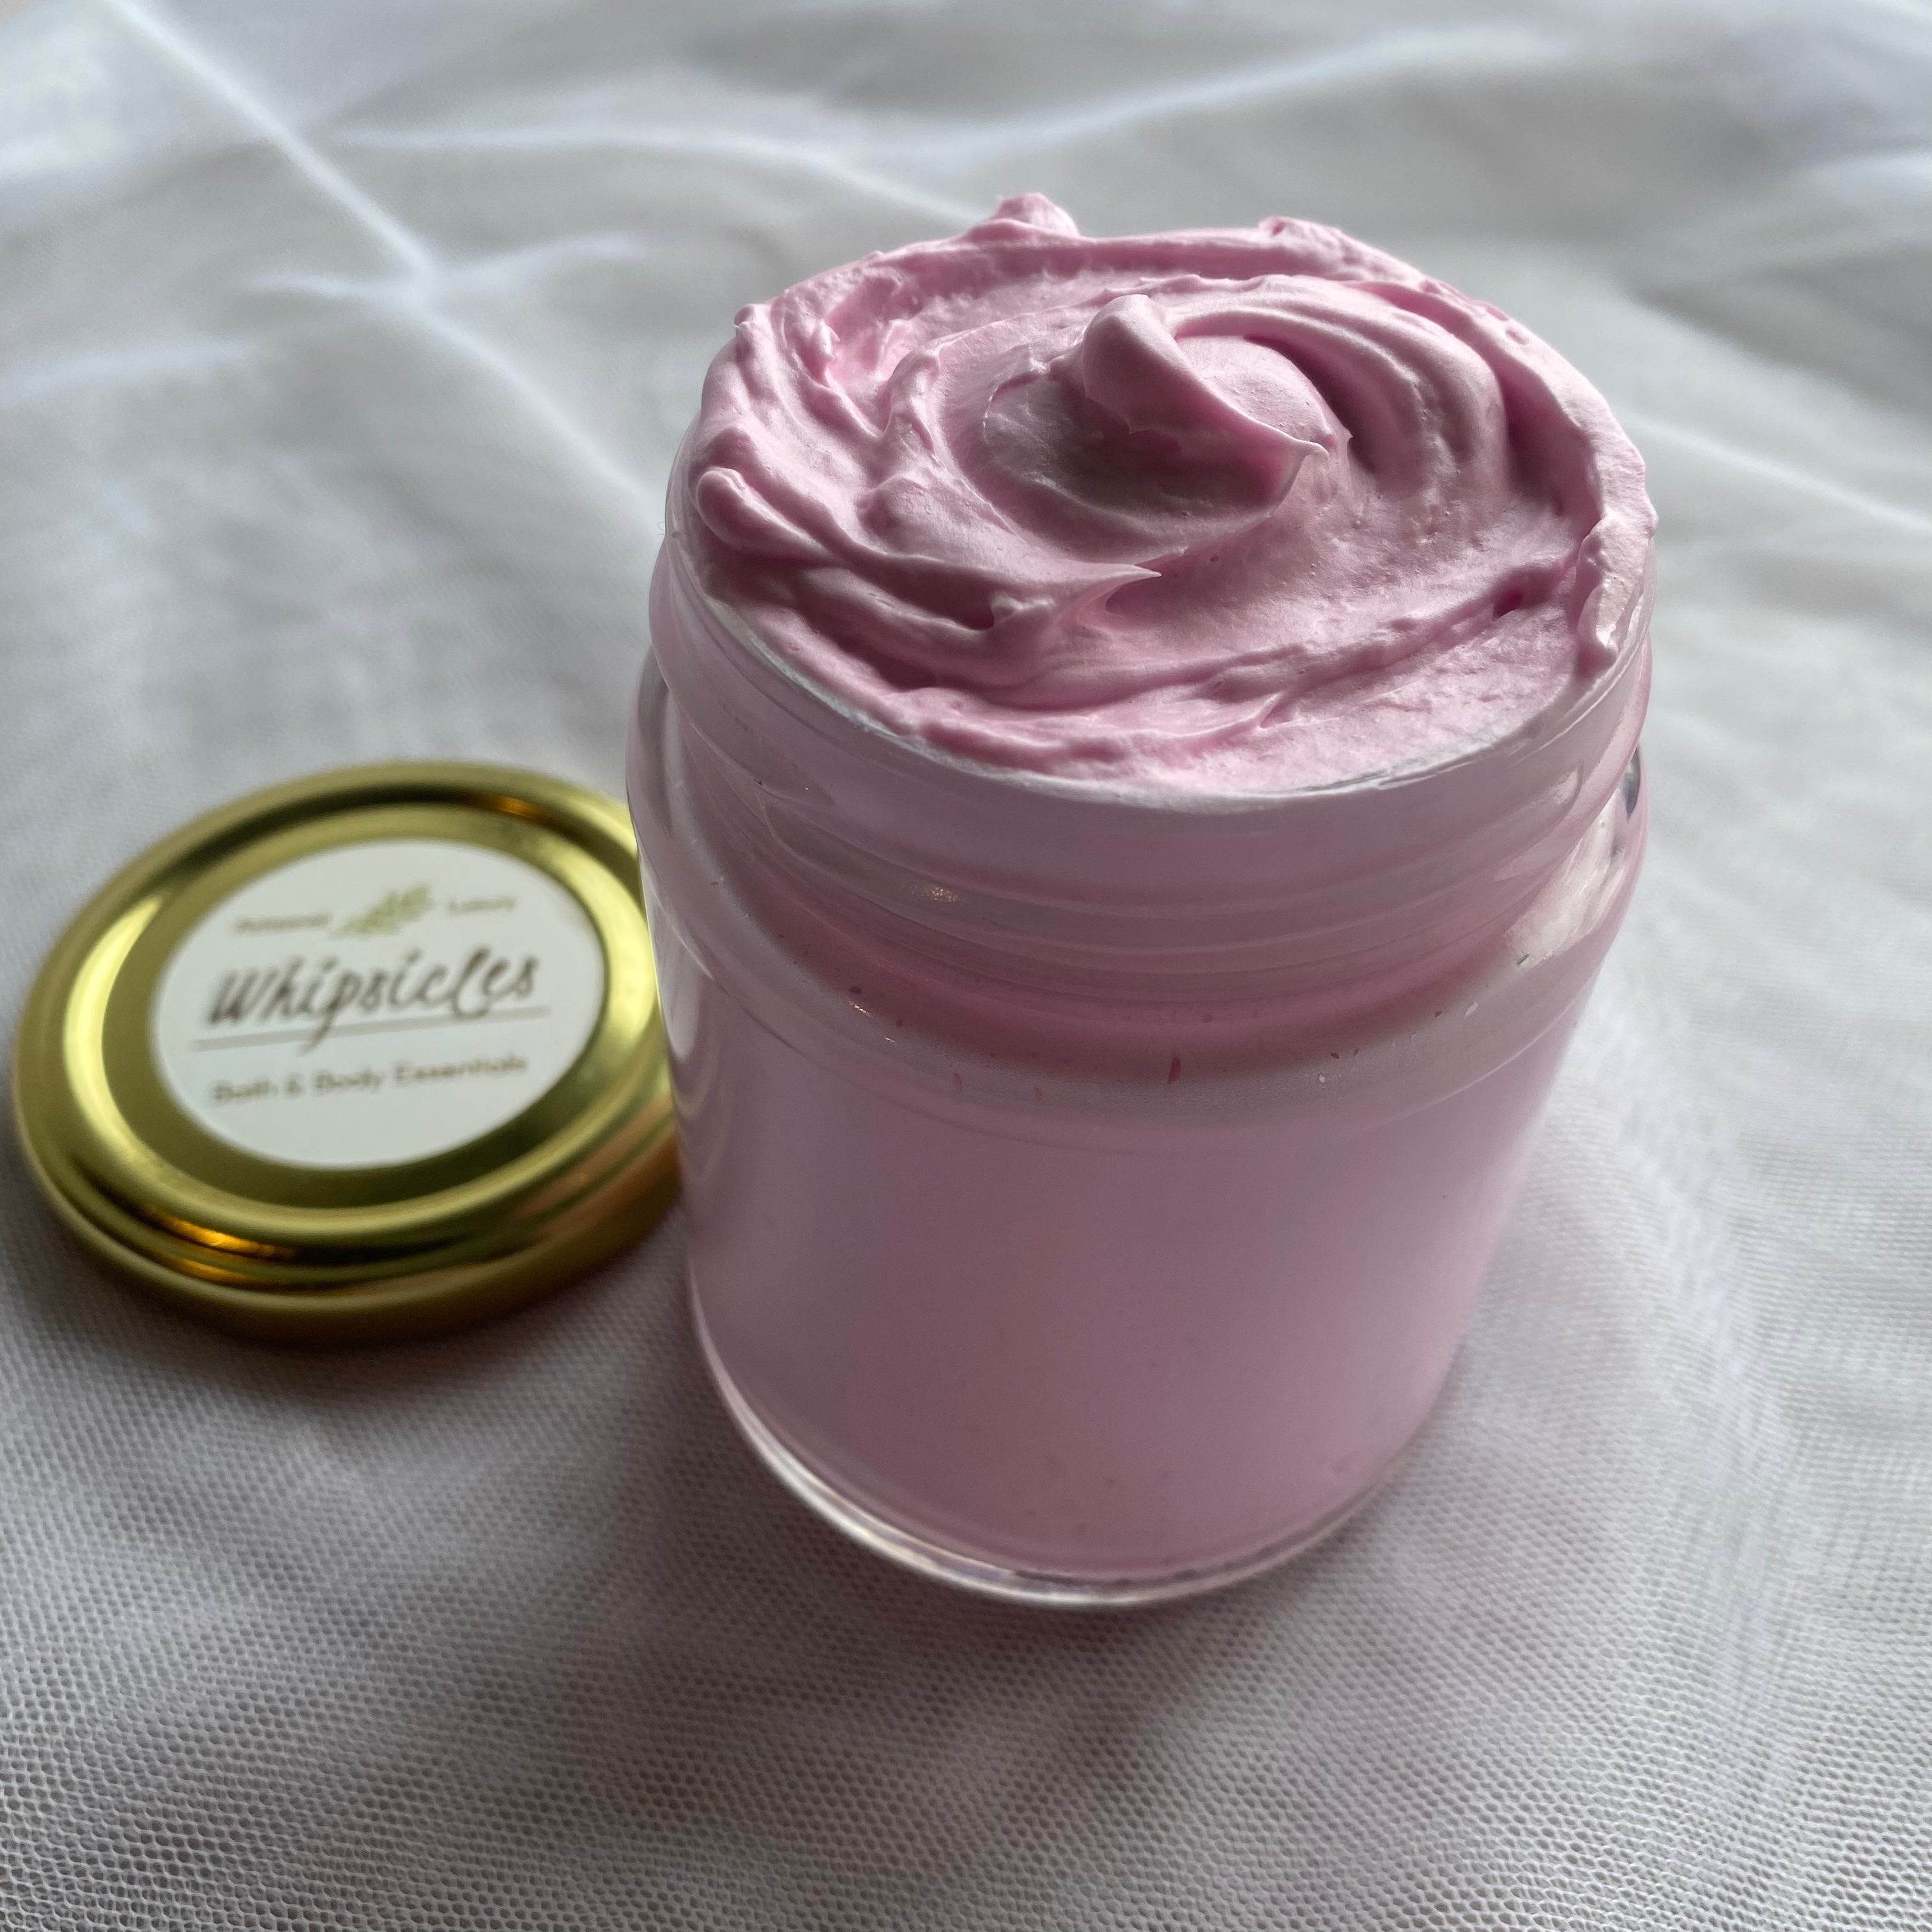 Mixed Berries Whipped Cream Soap